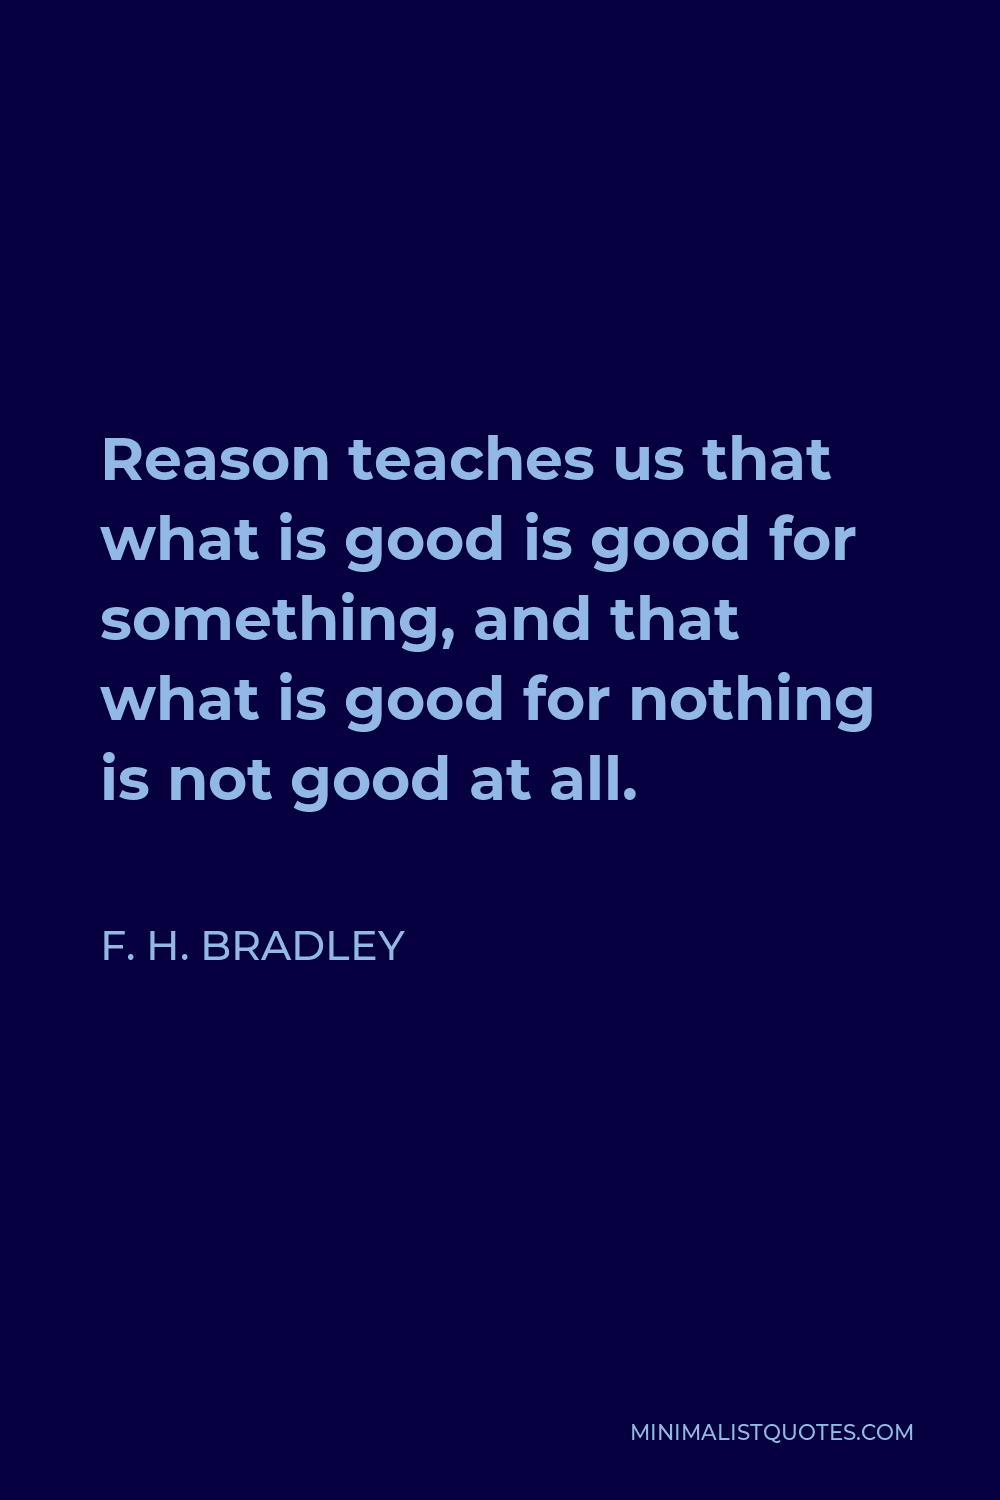 F. H. Bradley Quote - Reason teaches us that what is good is good for something, and that what is good for nothing is not good at all.